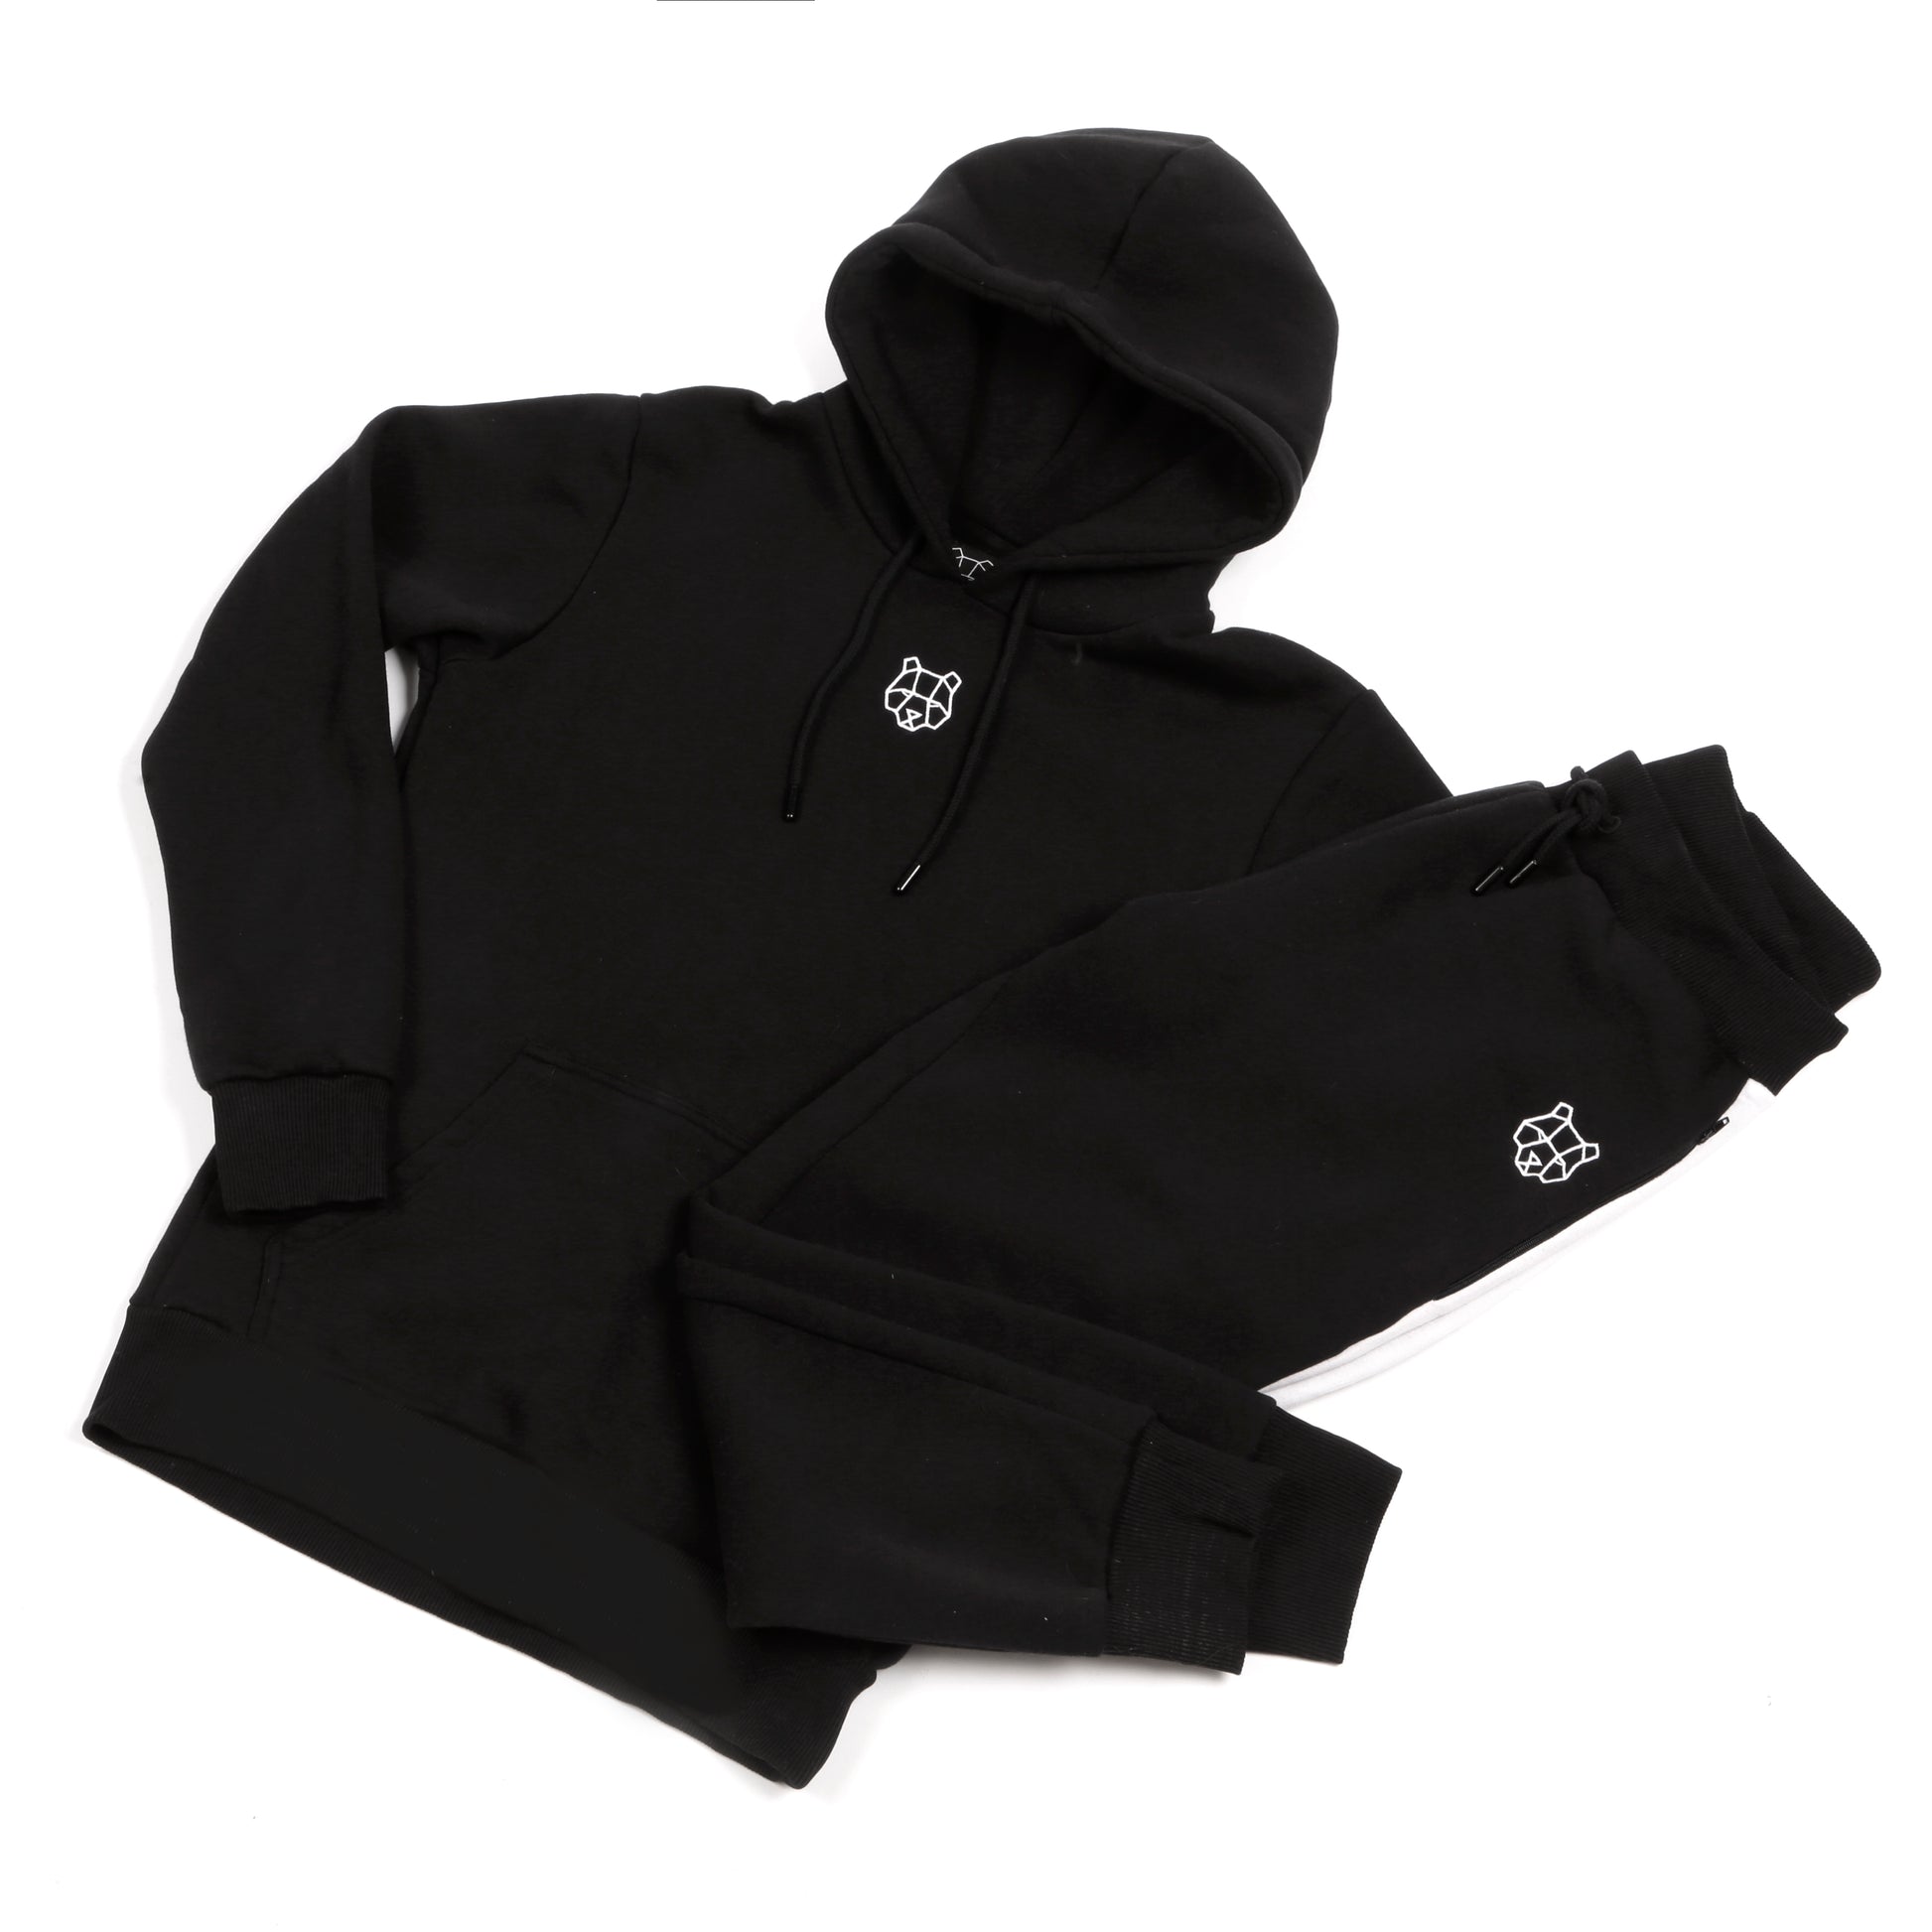 Black Hoodie Children's Tracksuit Christmas Gifts for Children